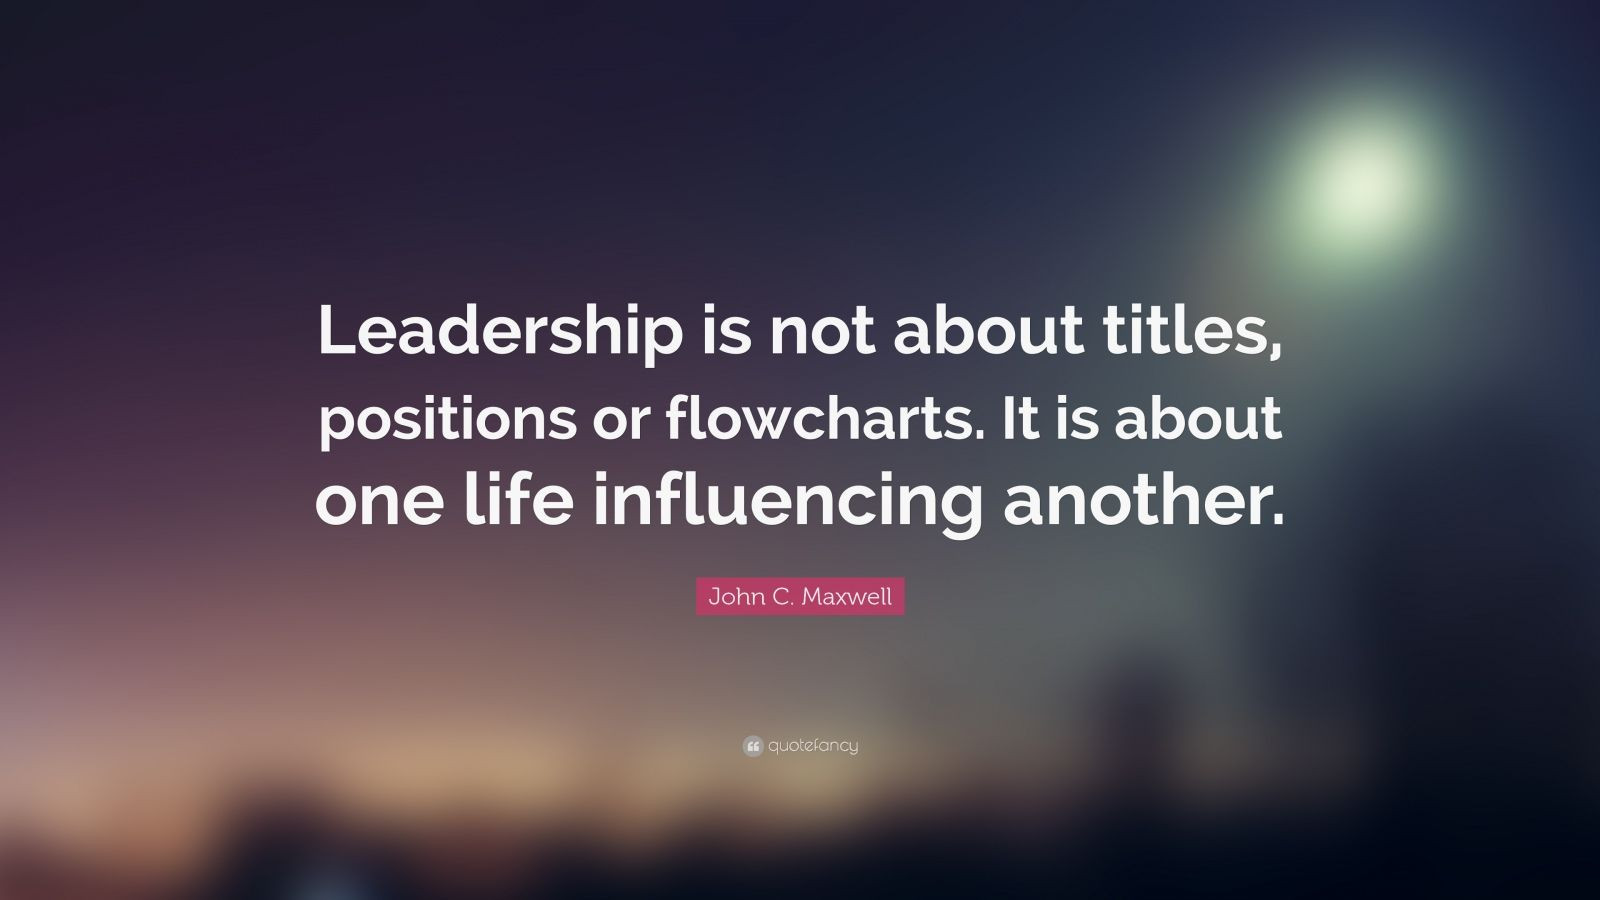 John Maxwell Quotes On Leadership
 John C Maxwell Quote “Leadership is not about titles